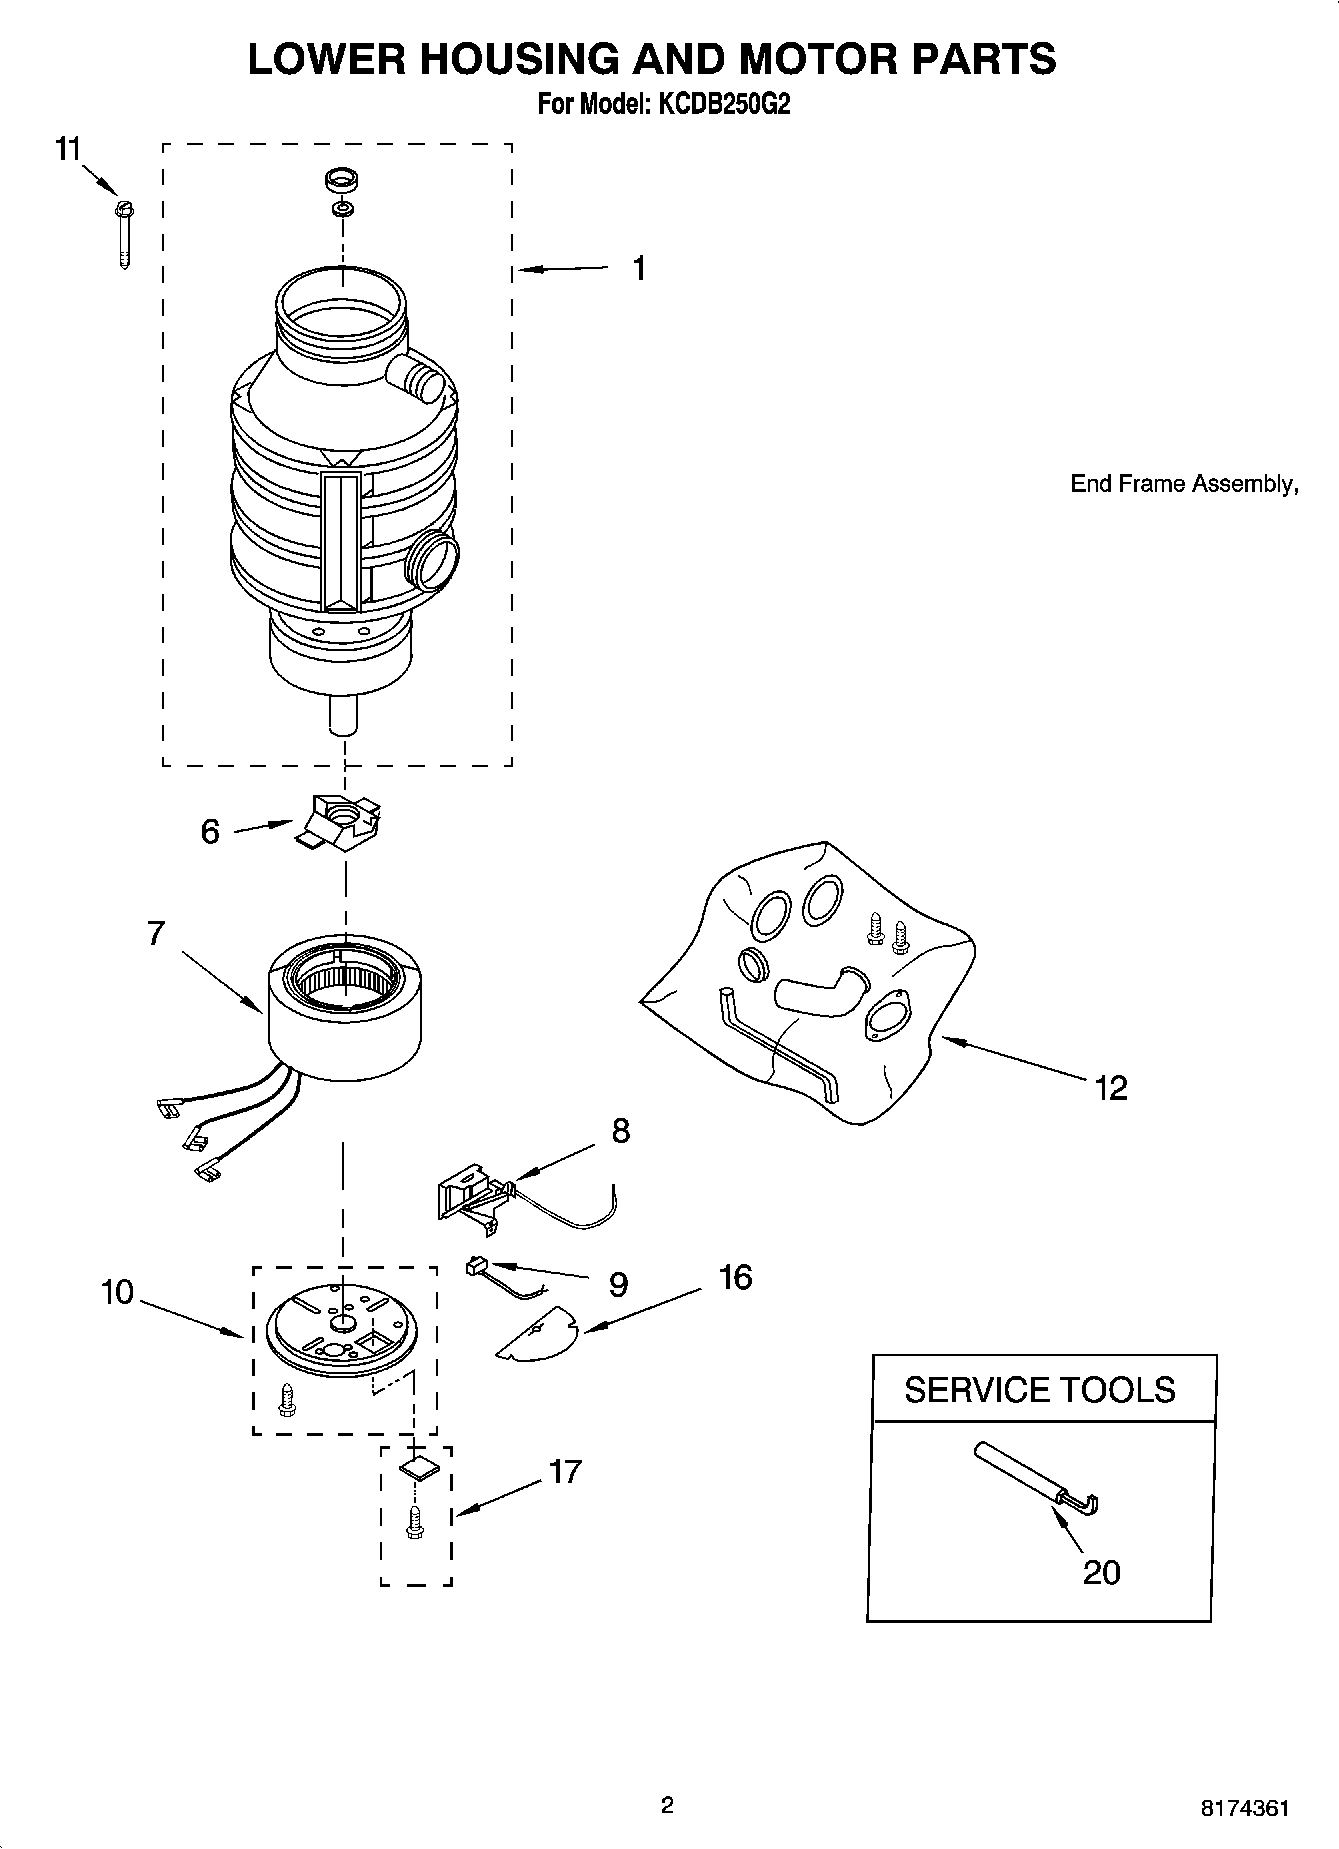 02 - LOWER HOUSING AND MOTOR PARTS